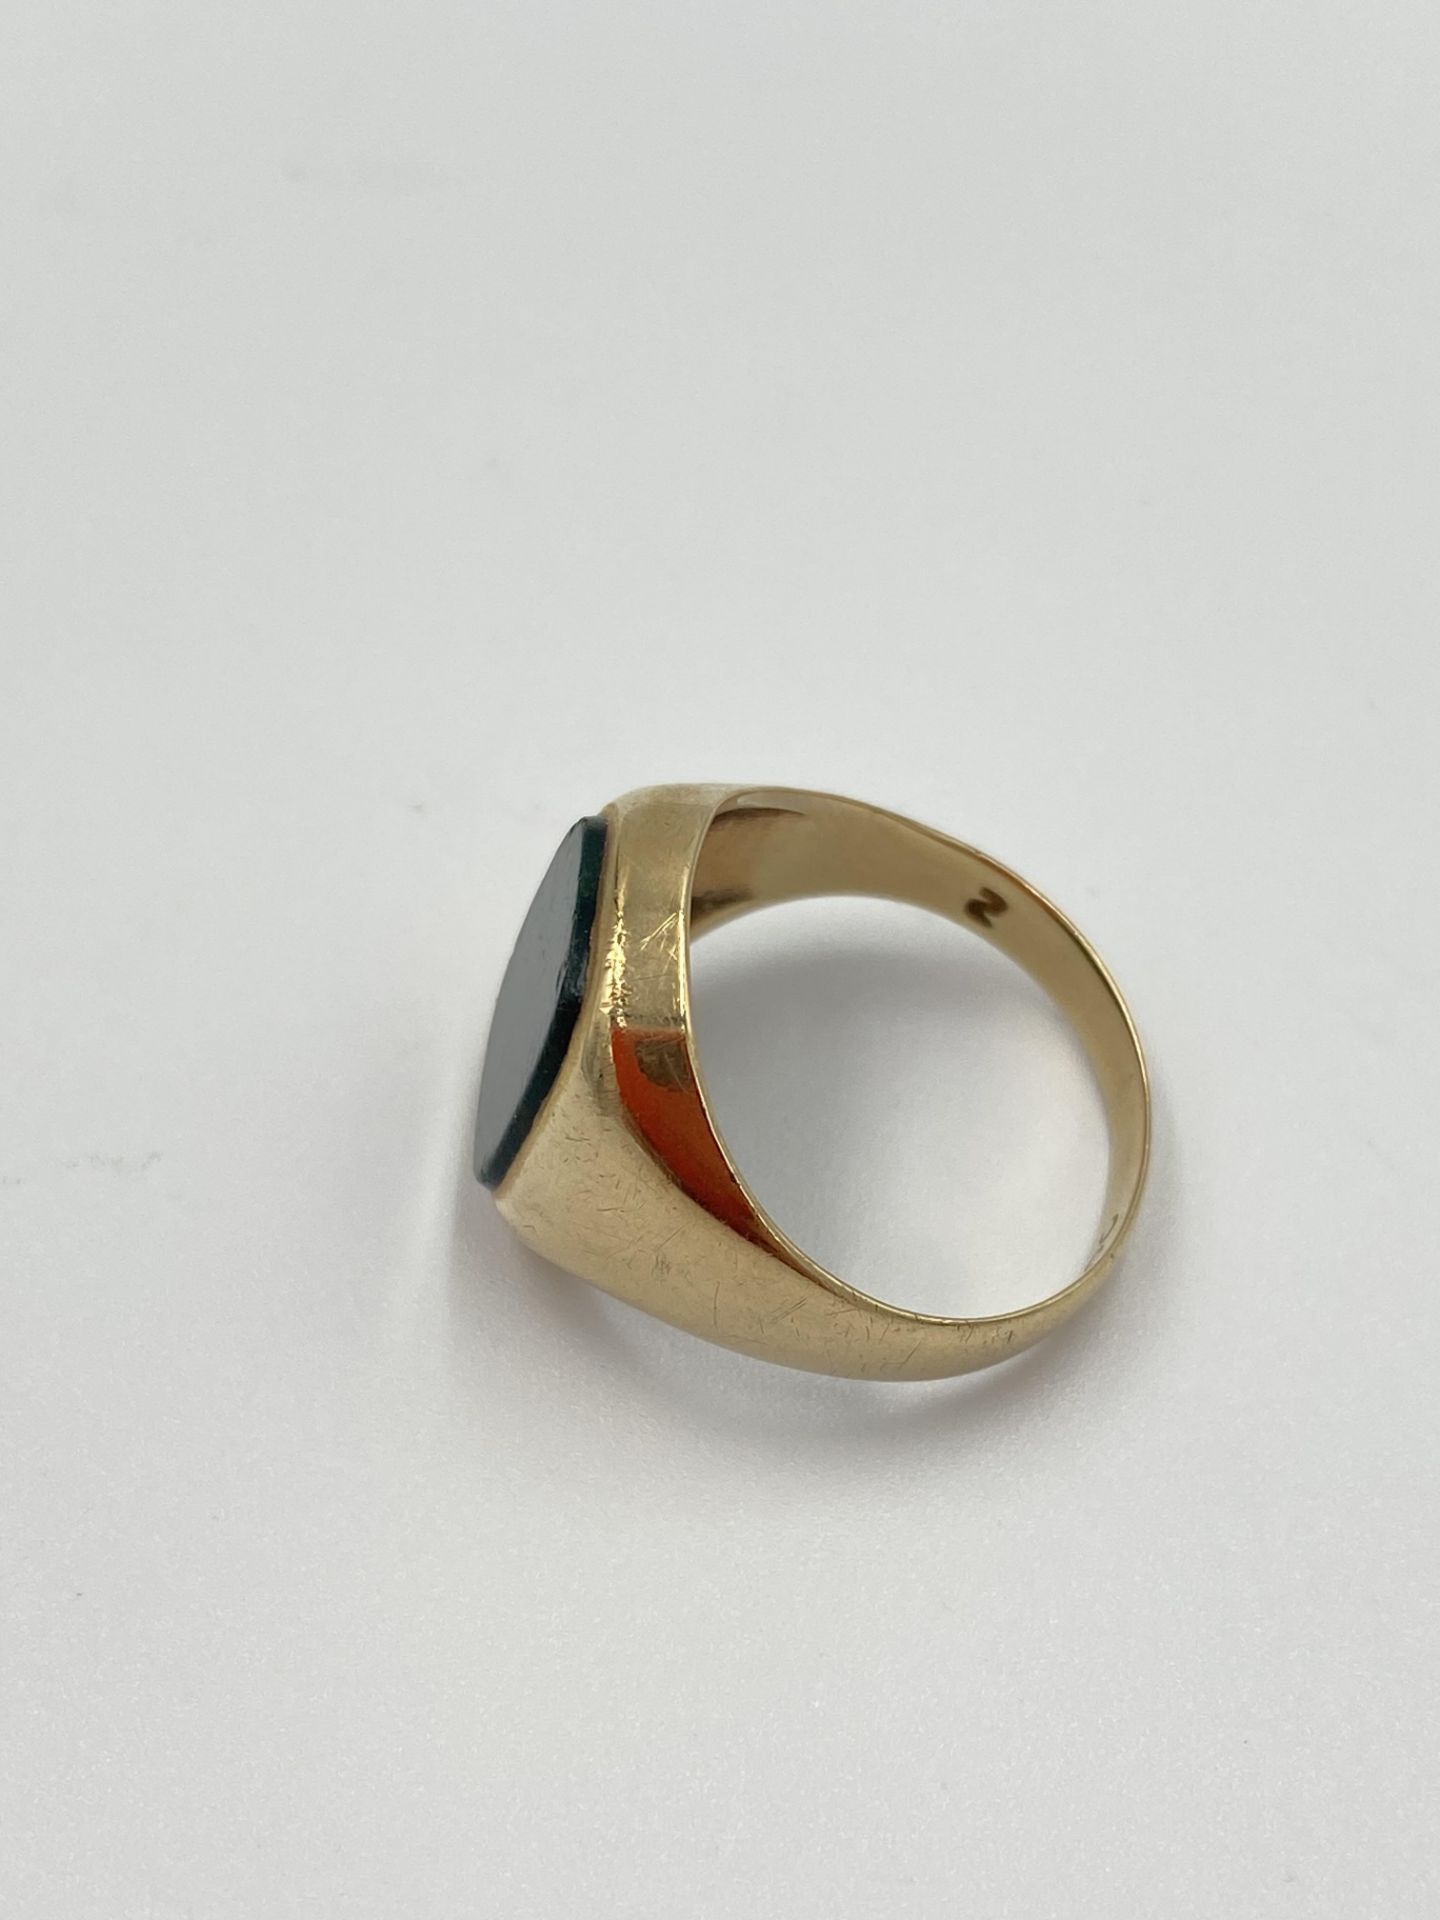 9ct gold and agate ring - Image 3 of 5